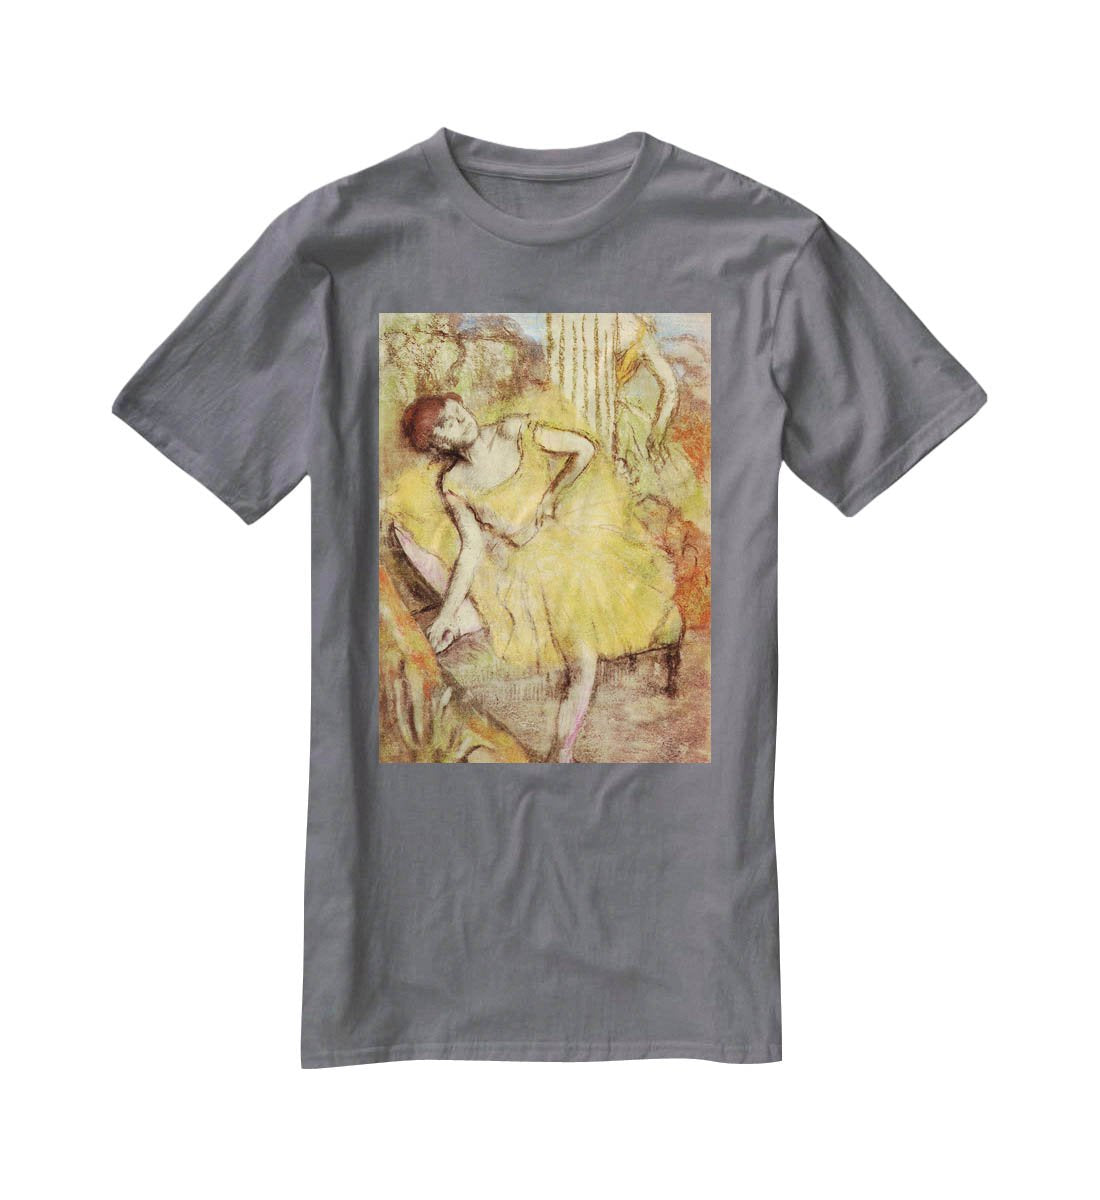 Sitting dancer with the right leg up by Degas T-Shirt - Canvas Art Rocks - 3